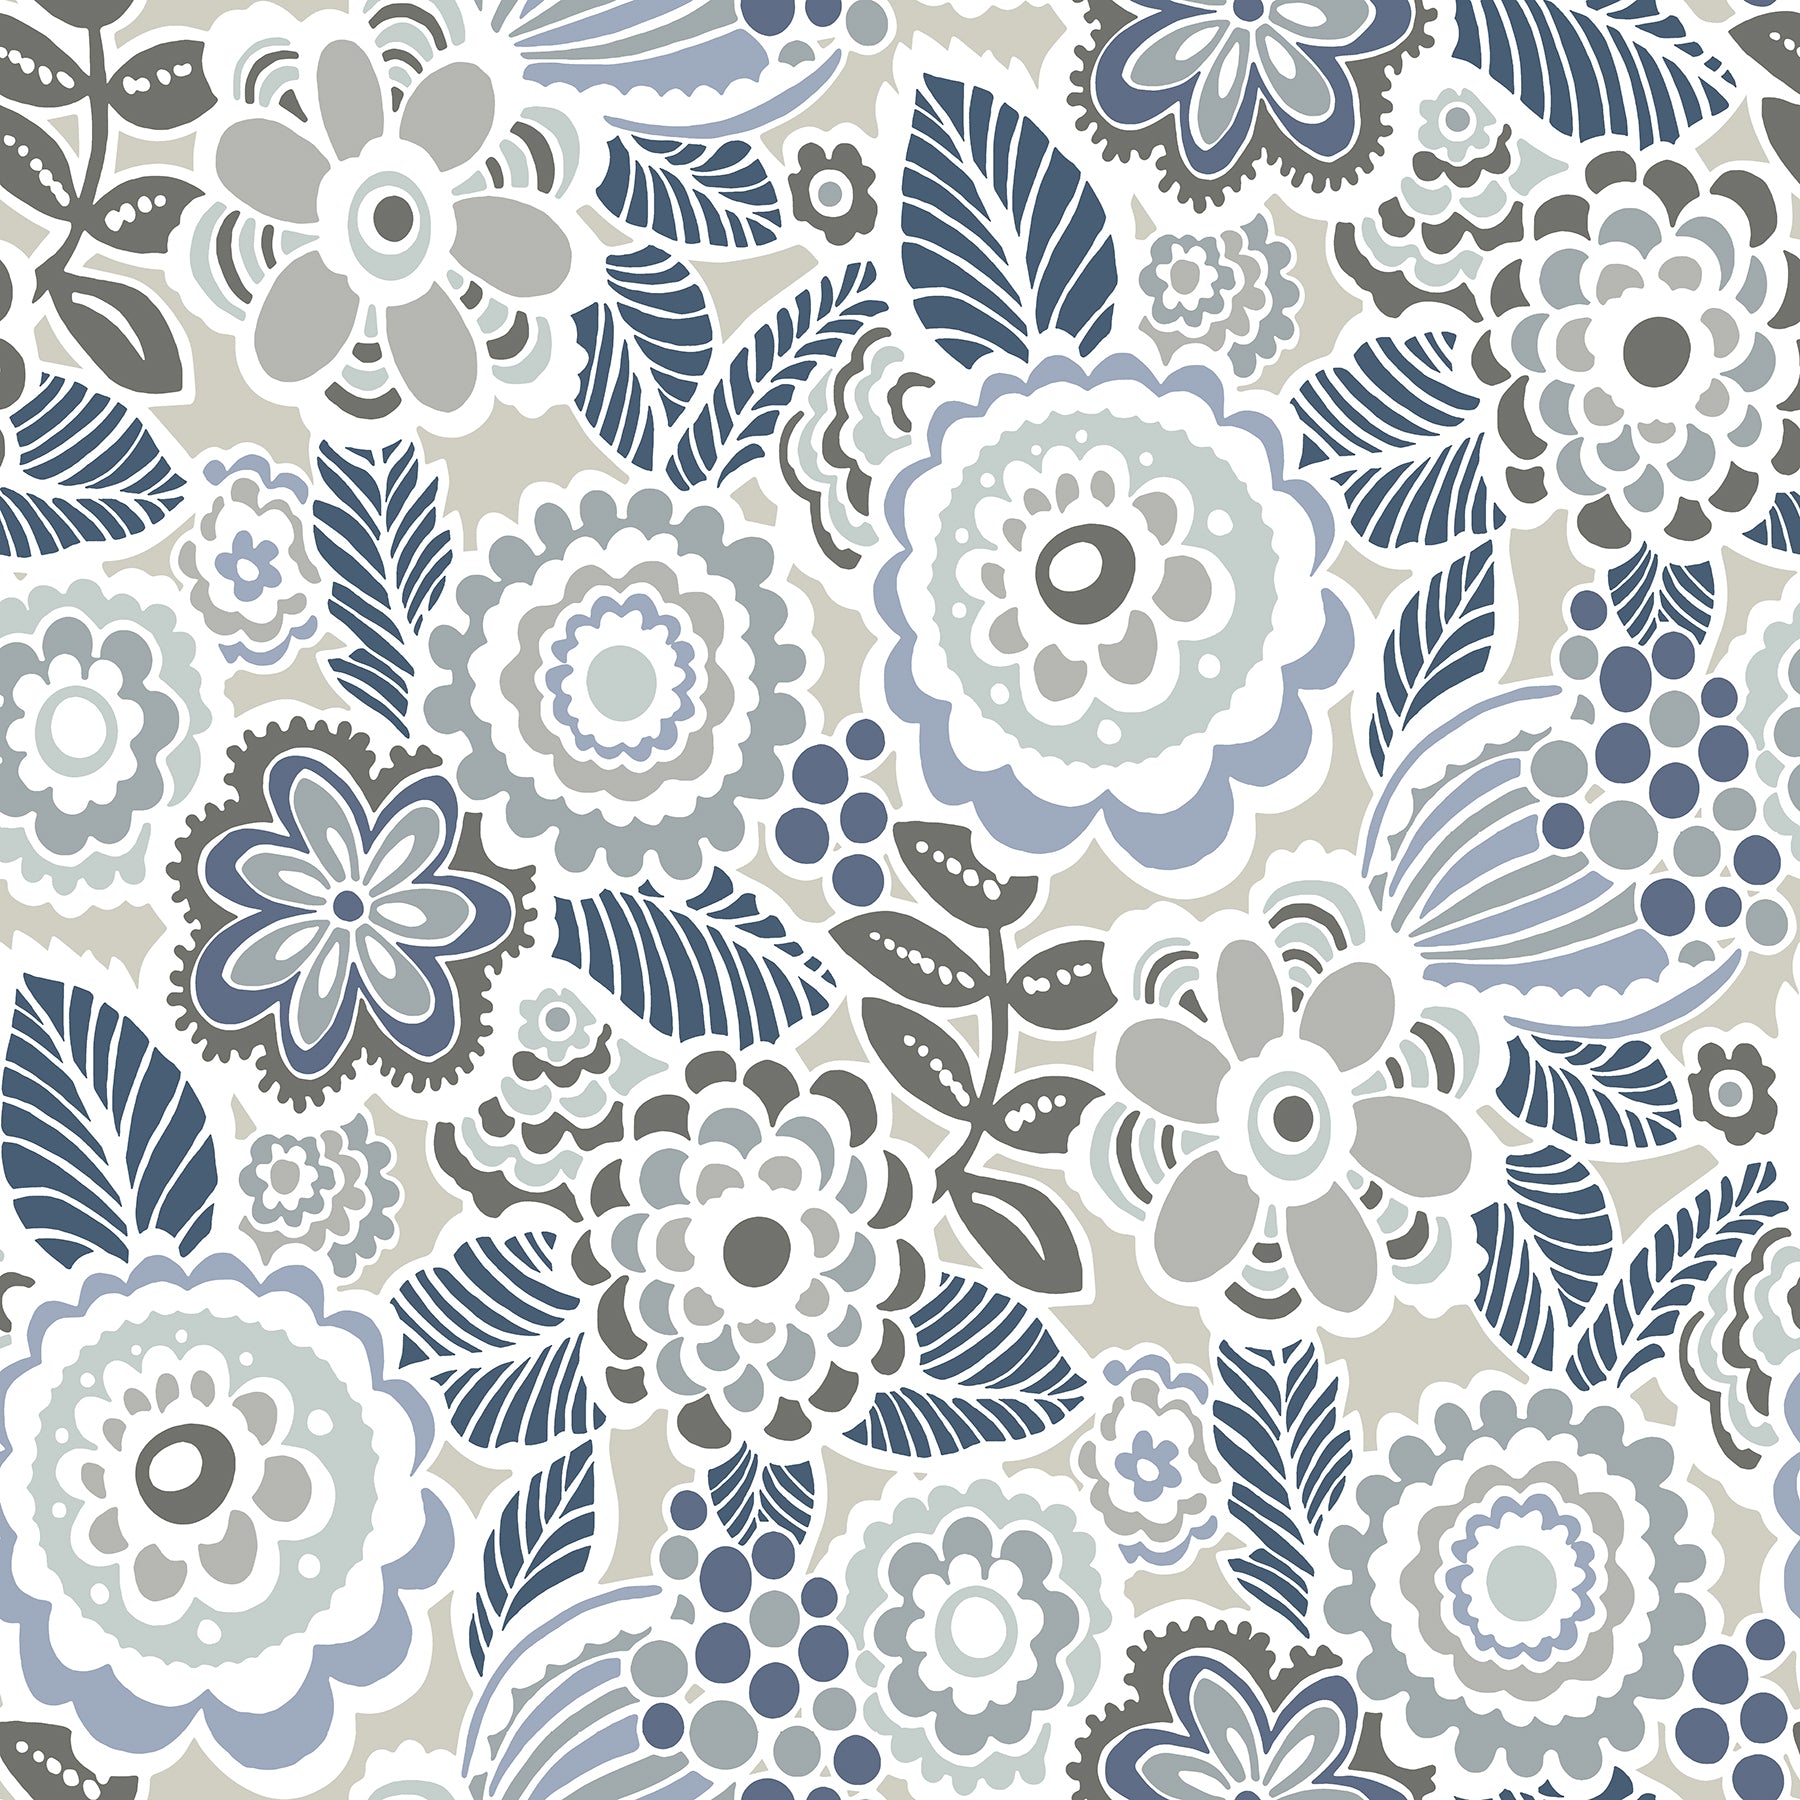 Looking for 2903-25864 Blue Bell Lucy Grey Floral A Street Prints Wallpaper